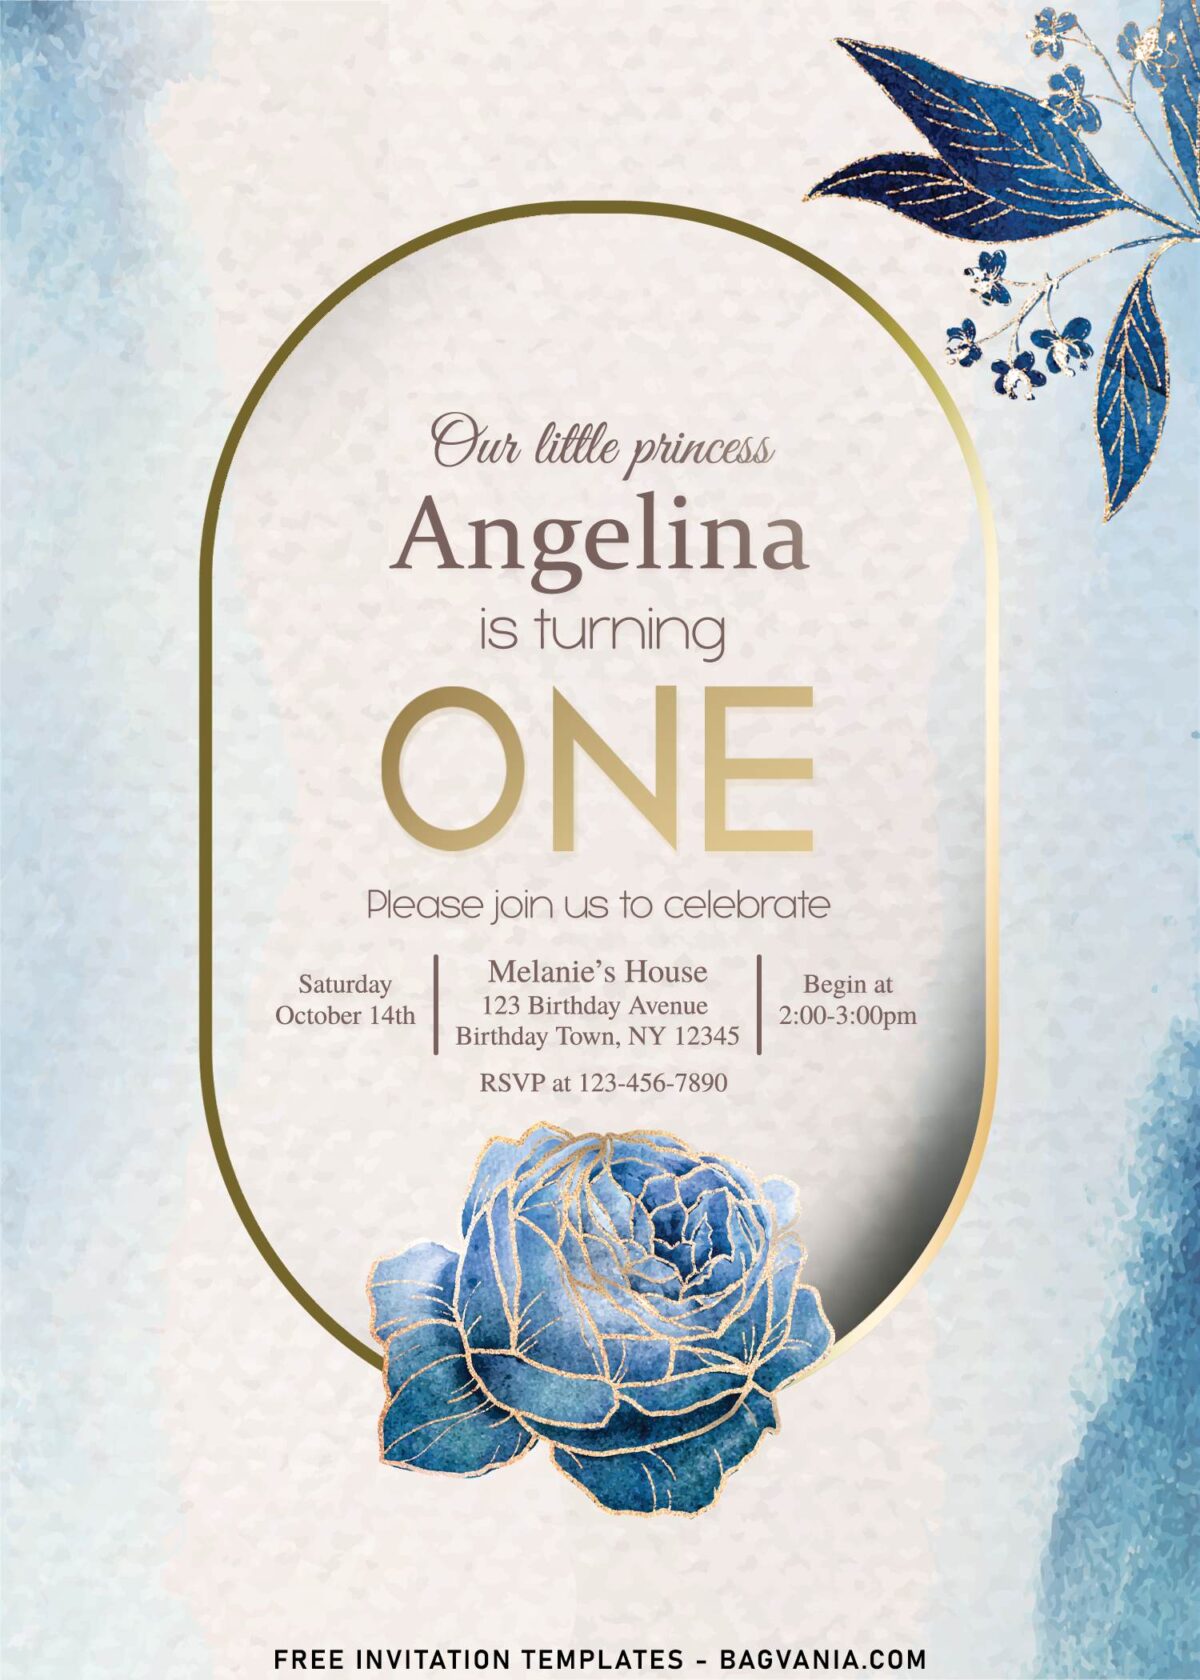 11+ Breathtaking Blue Floral Invitation Templates For Your Special Day